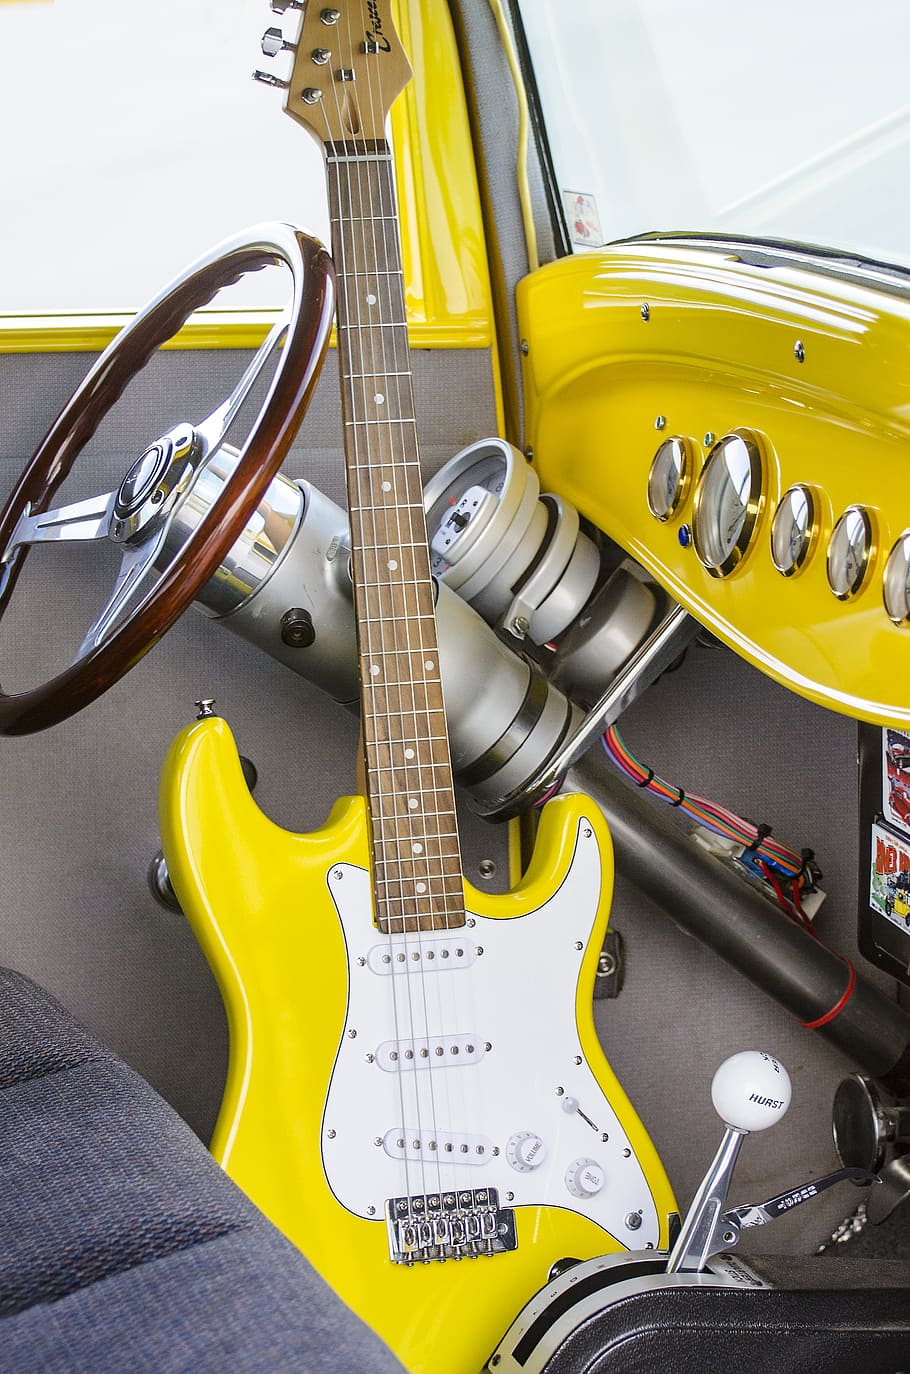 yellow electric guitar in yellow and gray interior car, steering wheel, HD wallpaper